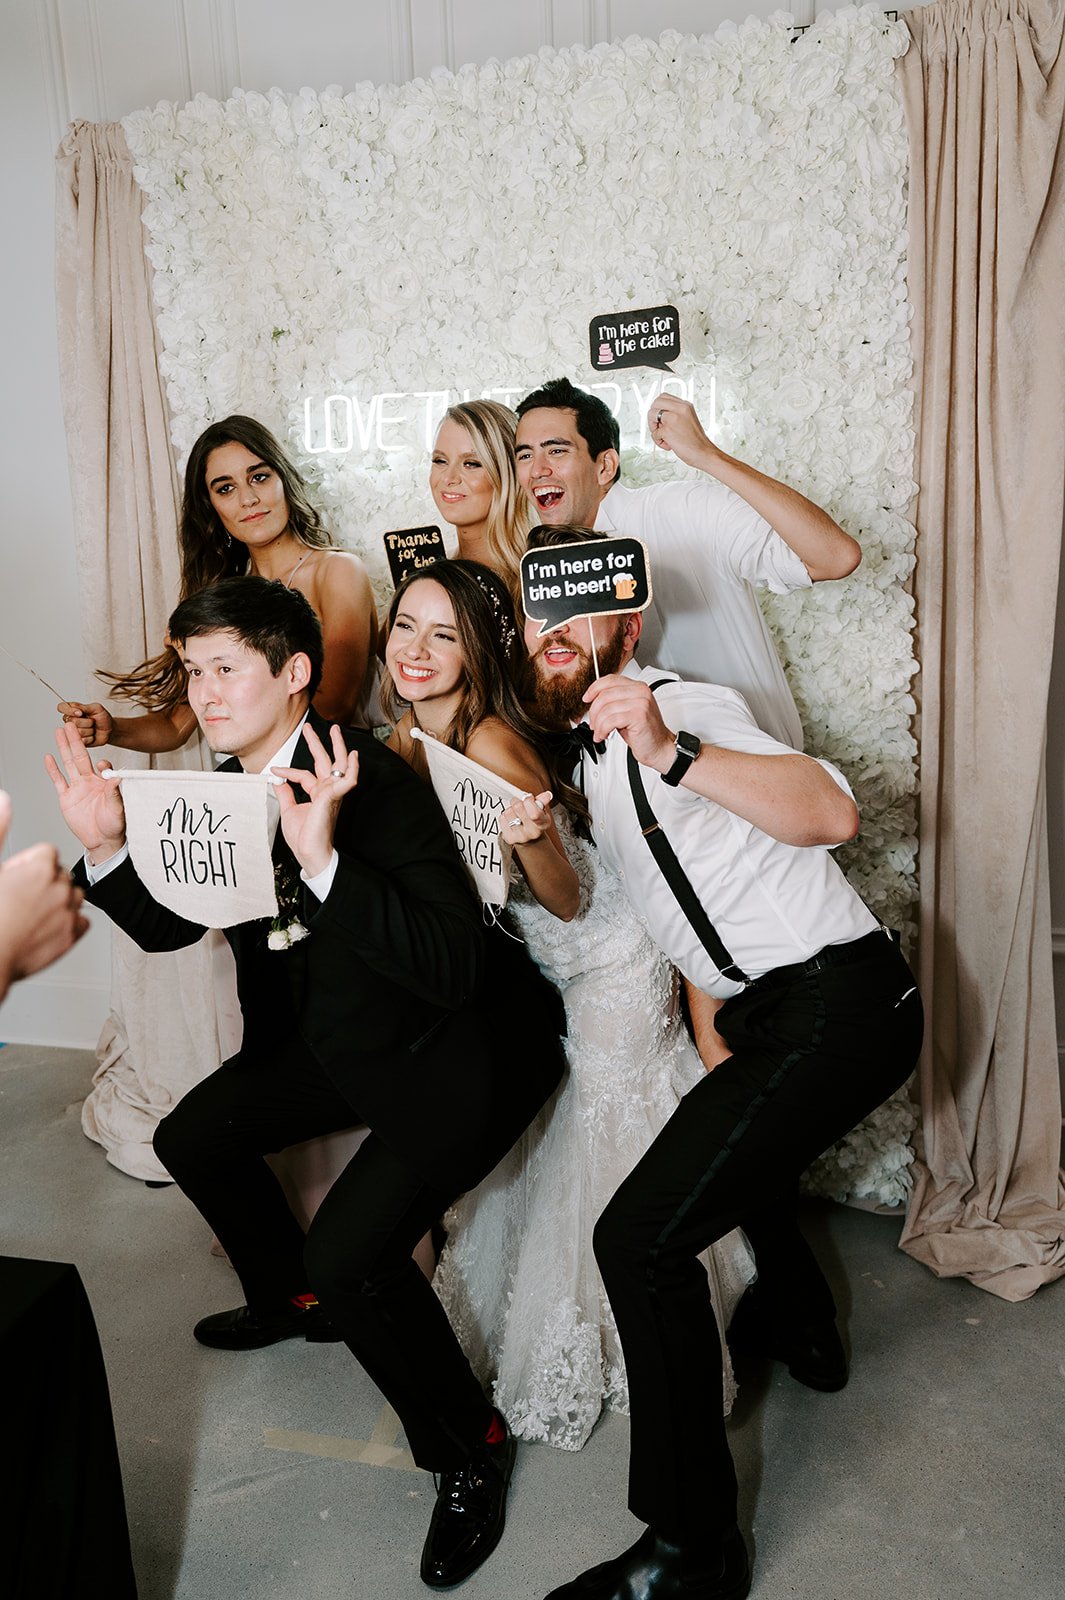 The bride and groom pose with their guests in front of a photo backdrop full of white flowers and a neon sign at their wedding reception.